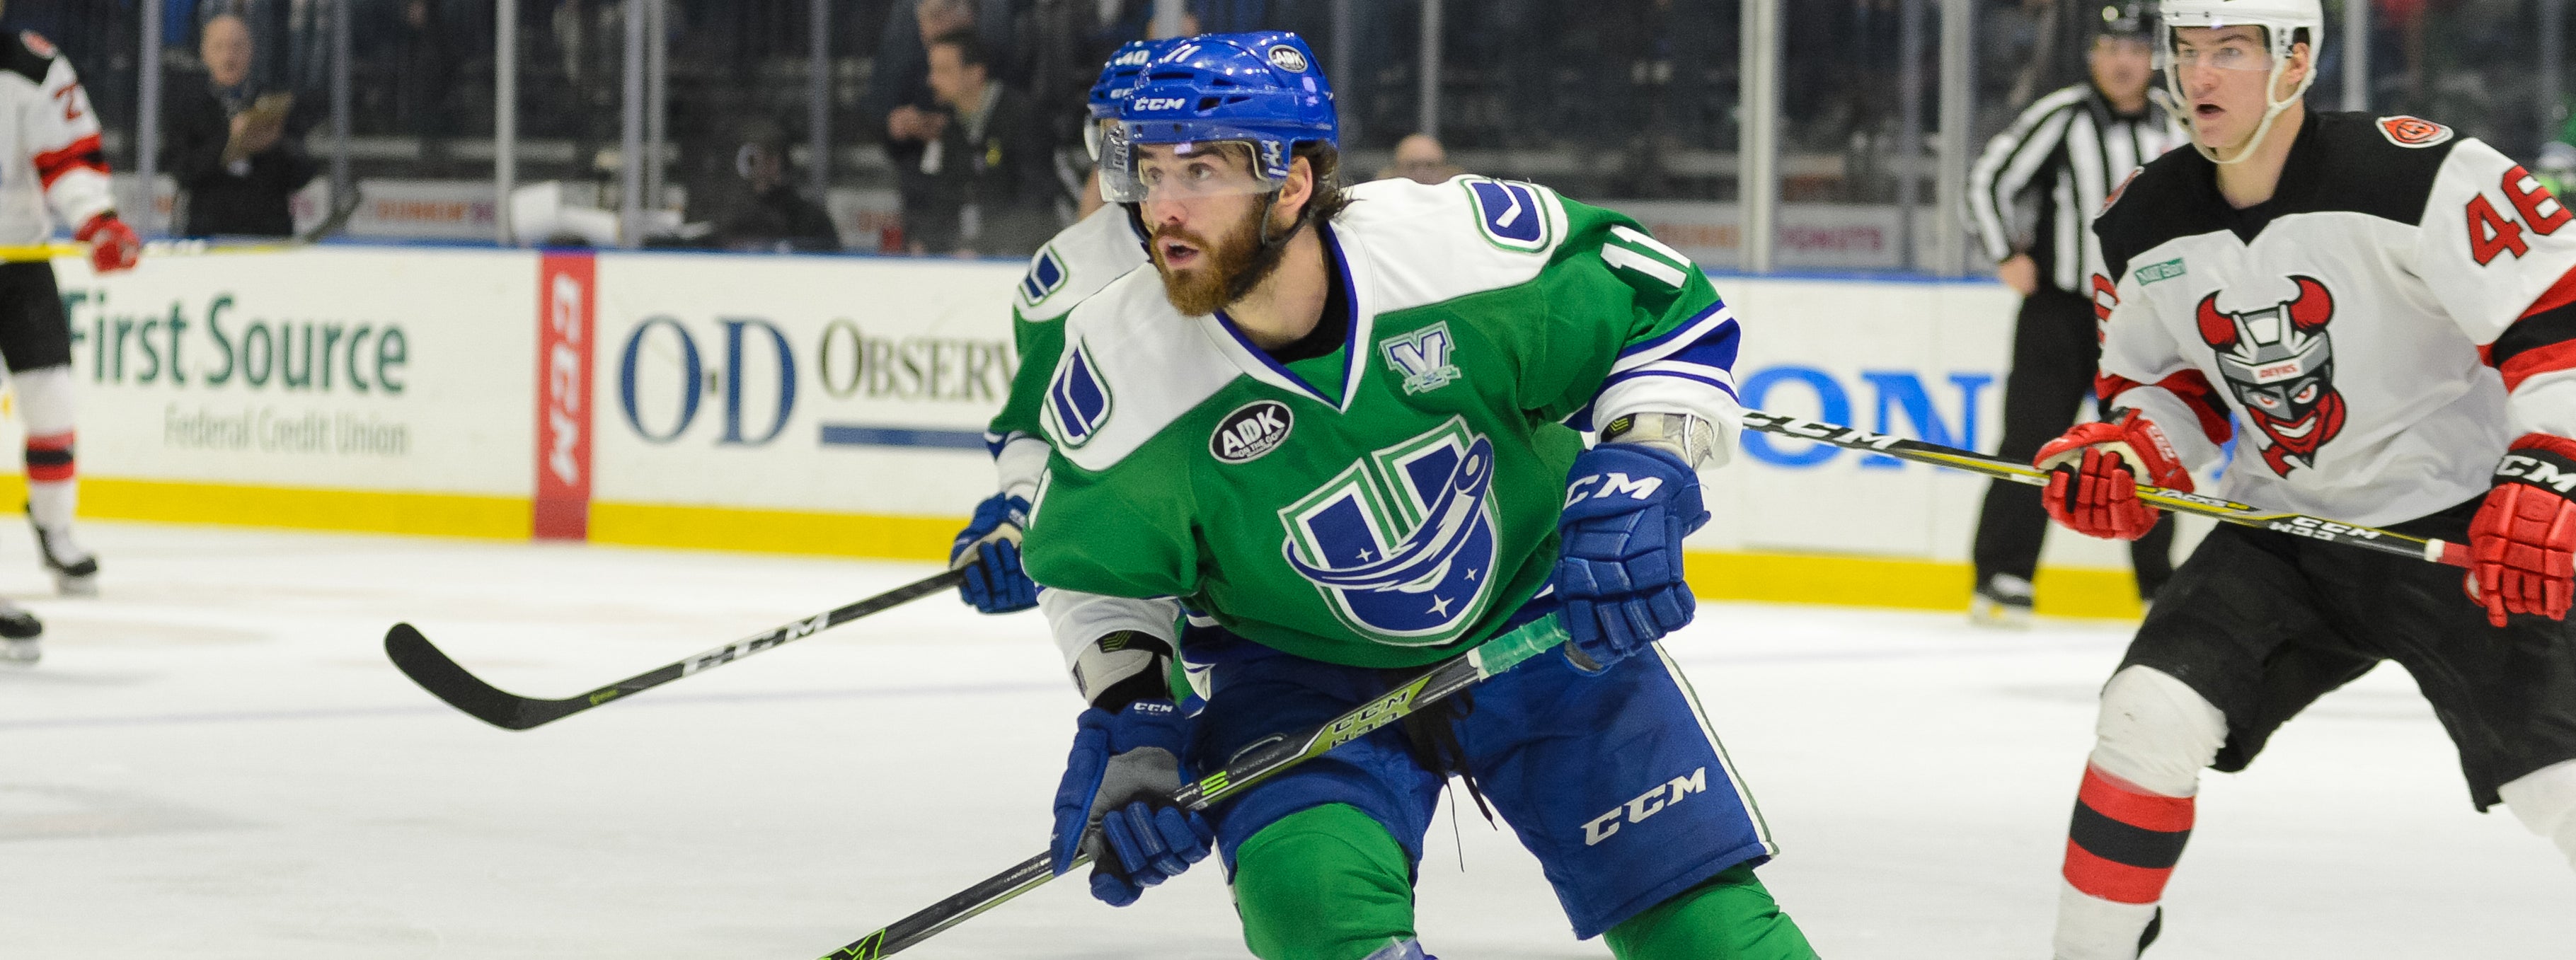 COMETS SIGN FORWARD CAM DARCY TO A ONE-YEAR EXTENSION